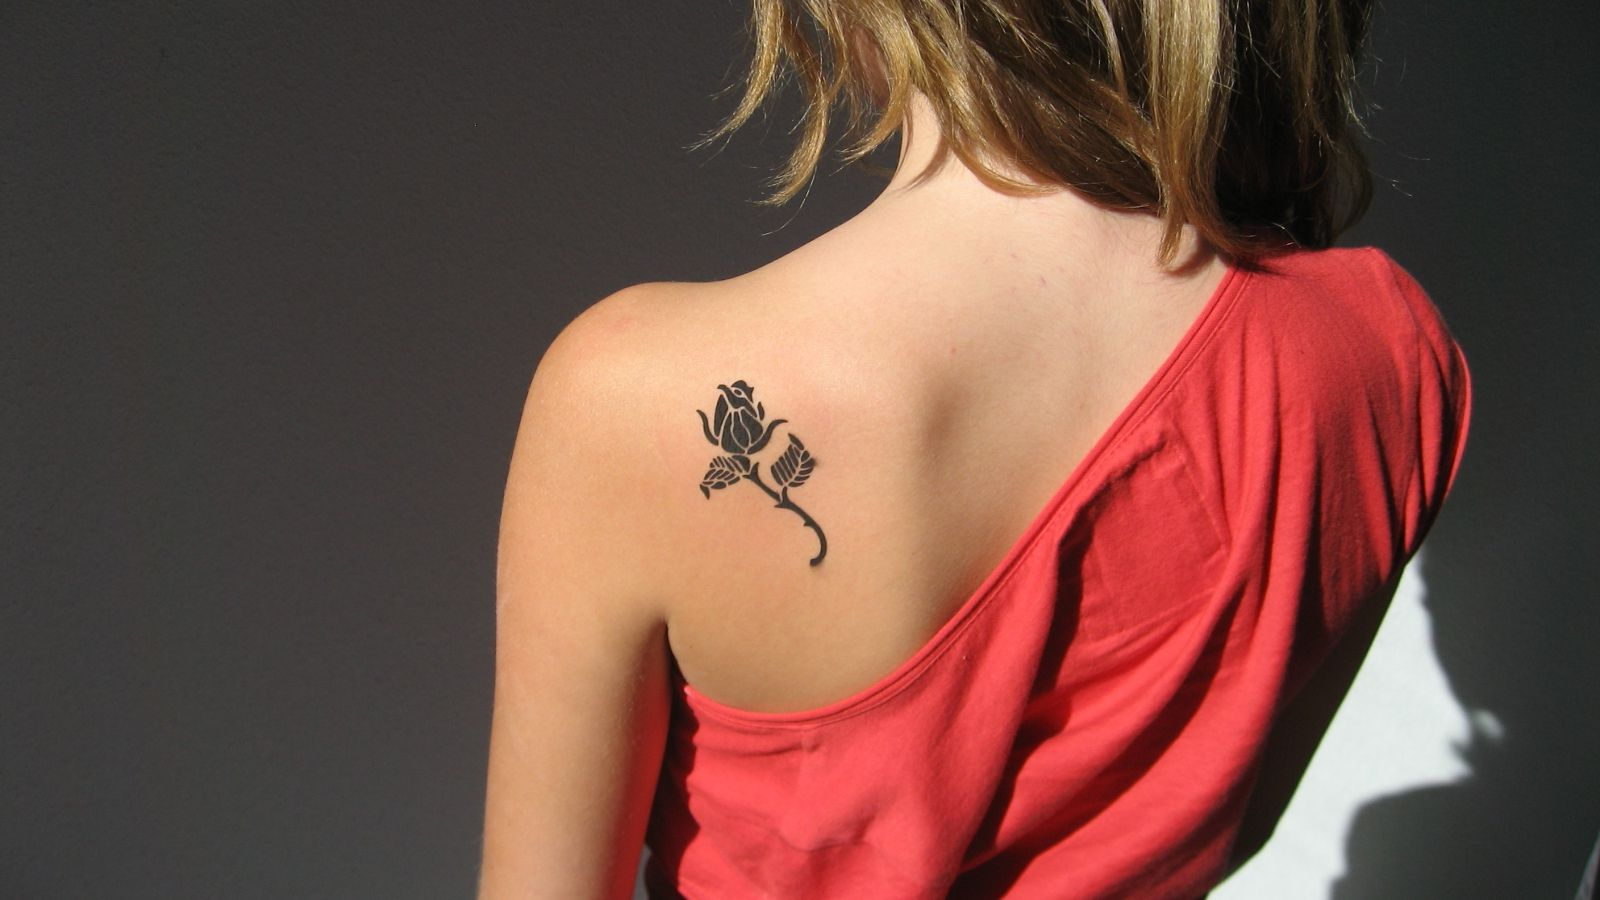 Girl Tattoos On Shoulder Blade 30 Small Cute Tattoos For Girls inside dimensions 1600 X 900